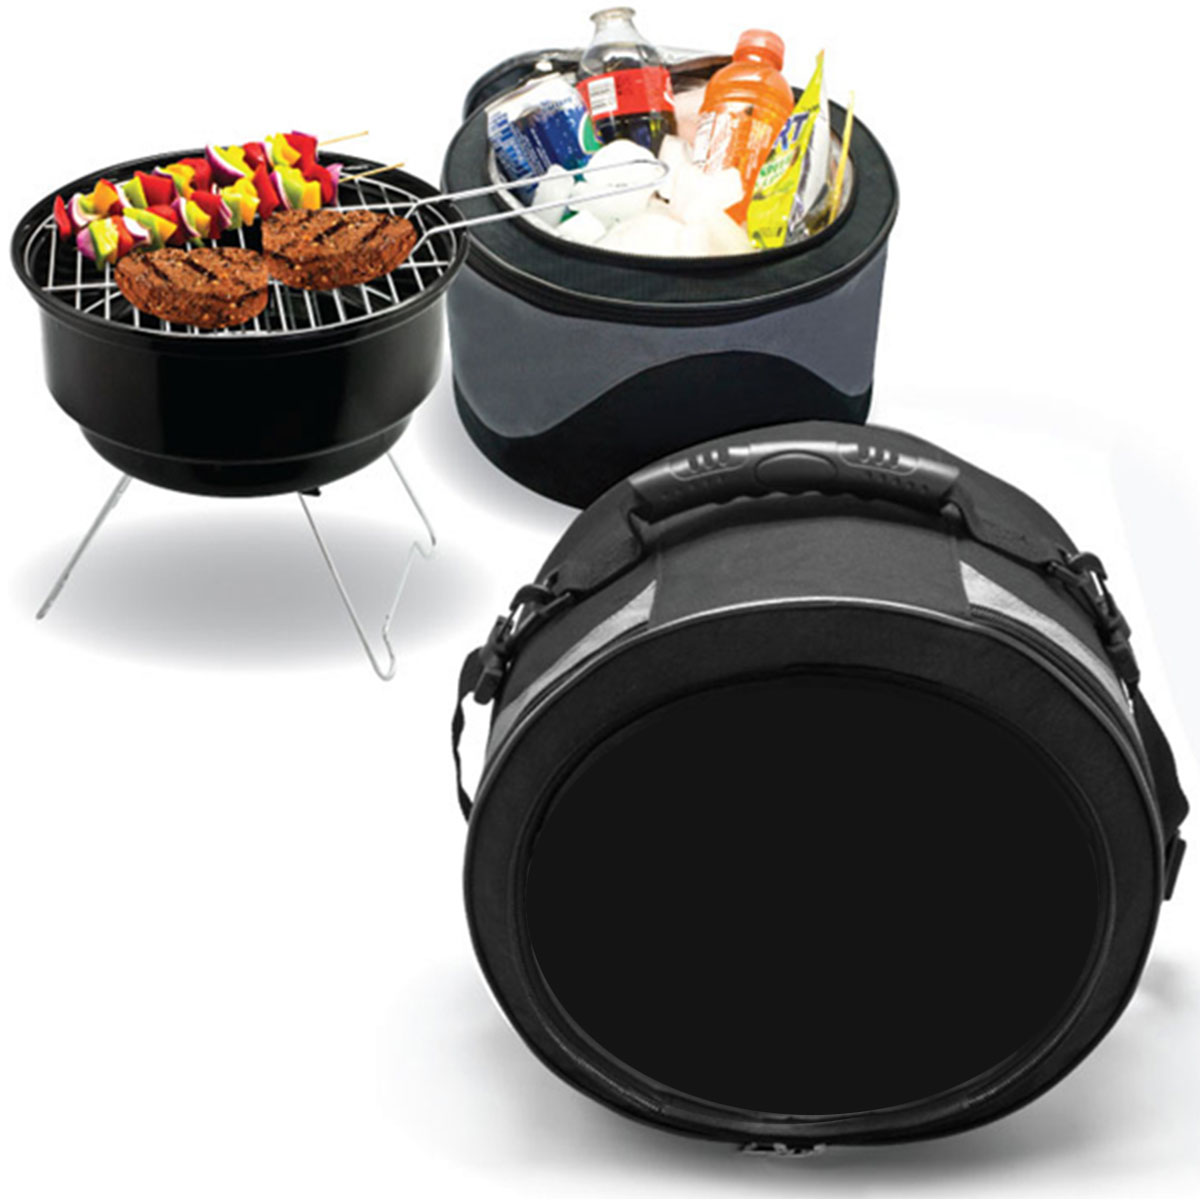 Gray/Black 2-in-1 BBQ Grill and Cooler